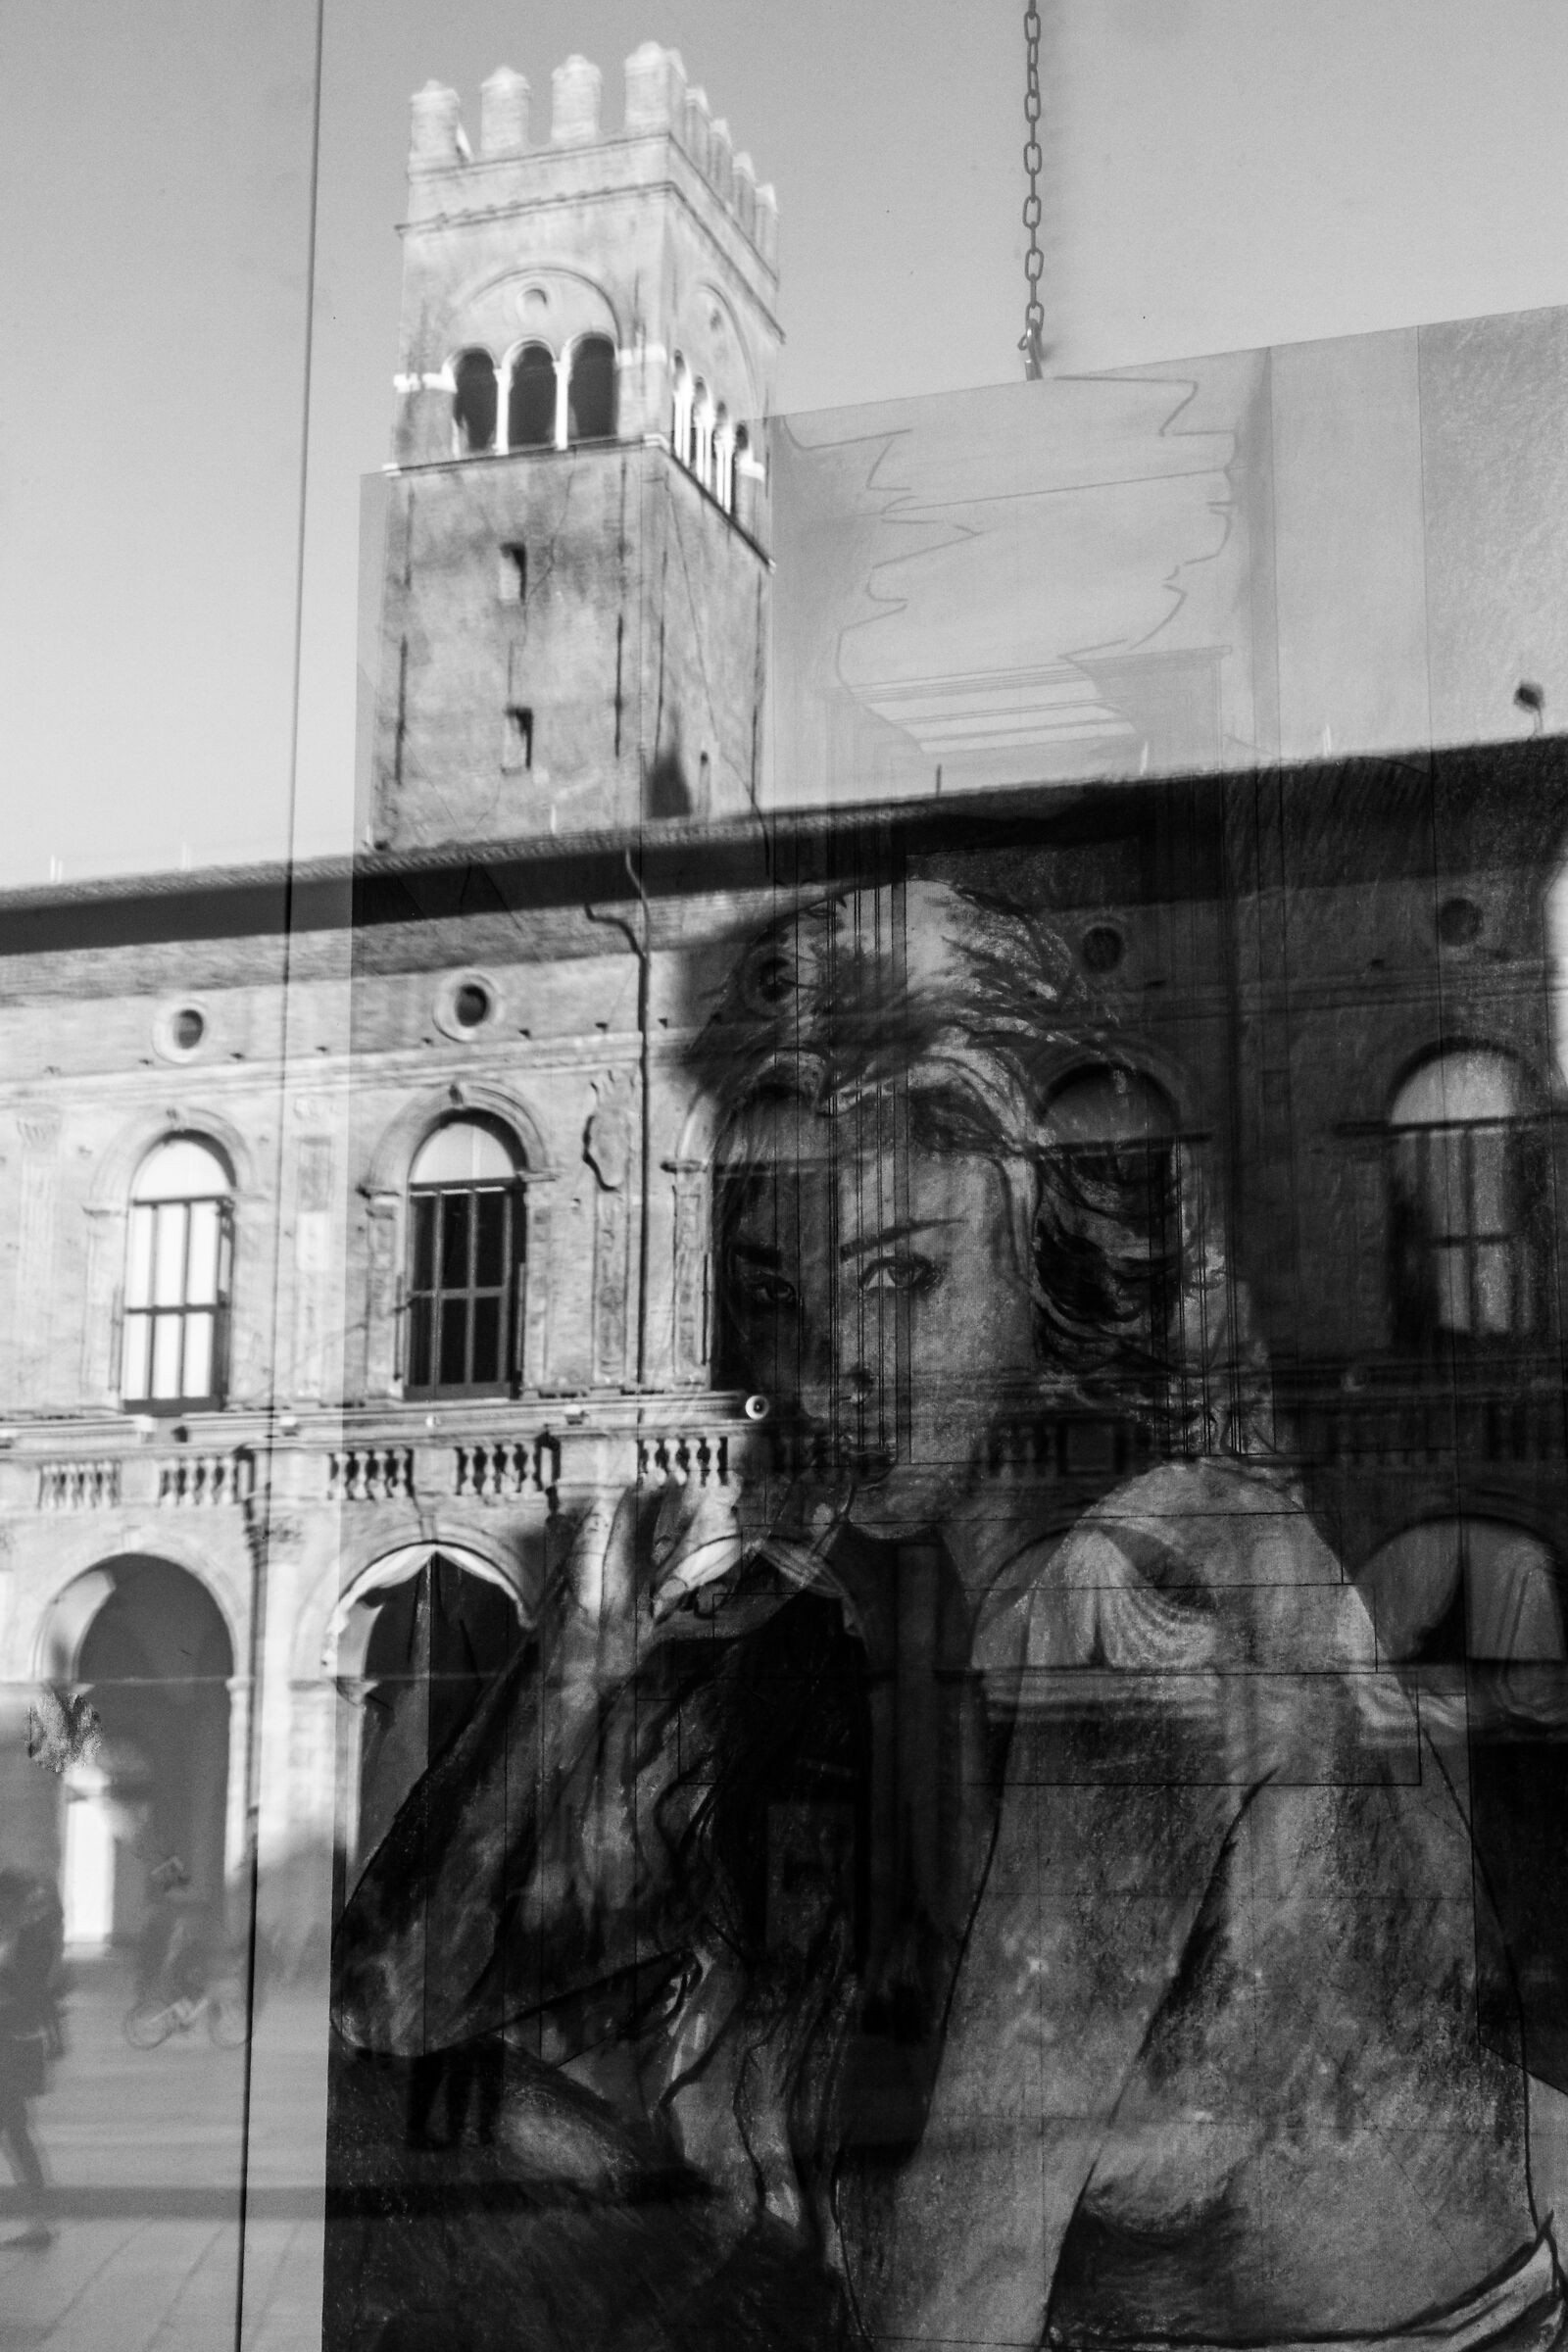 Bologna mirrors itself in the window...